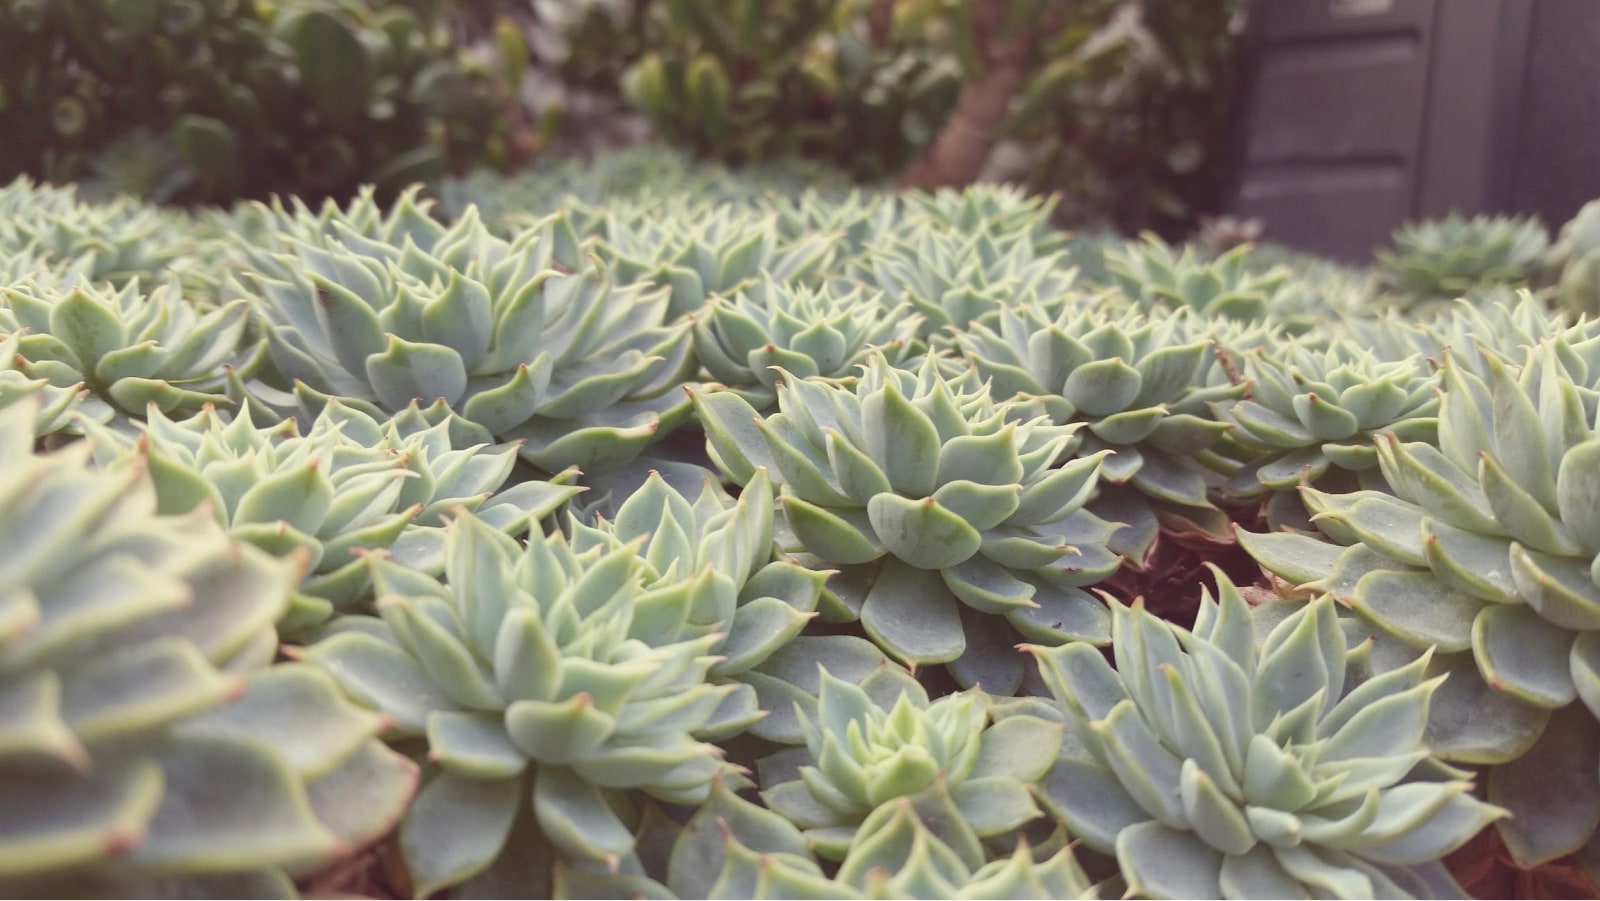 Succulents planted as part of drought-tolerant landscaping.